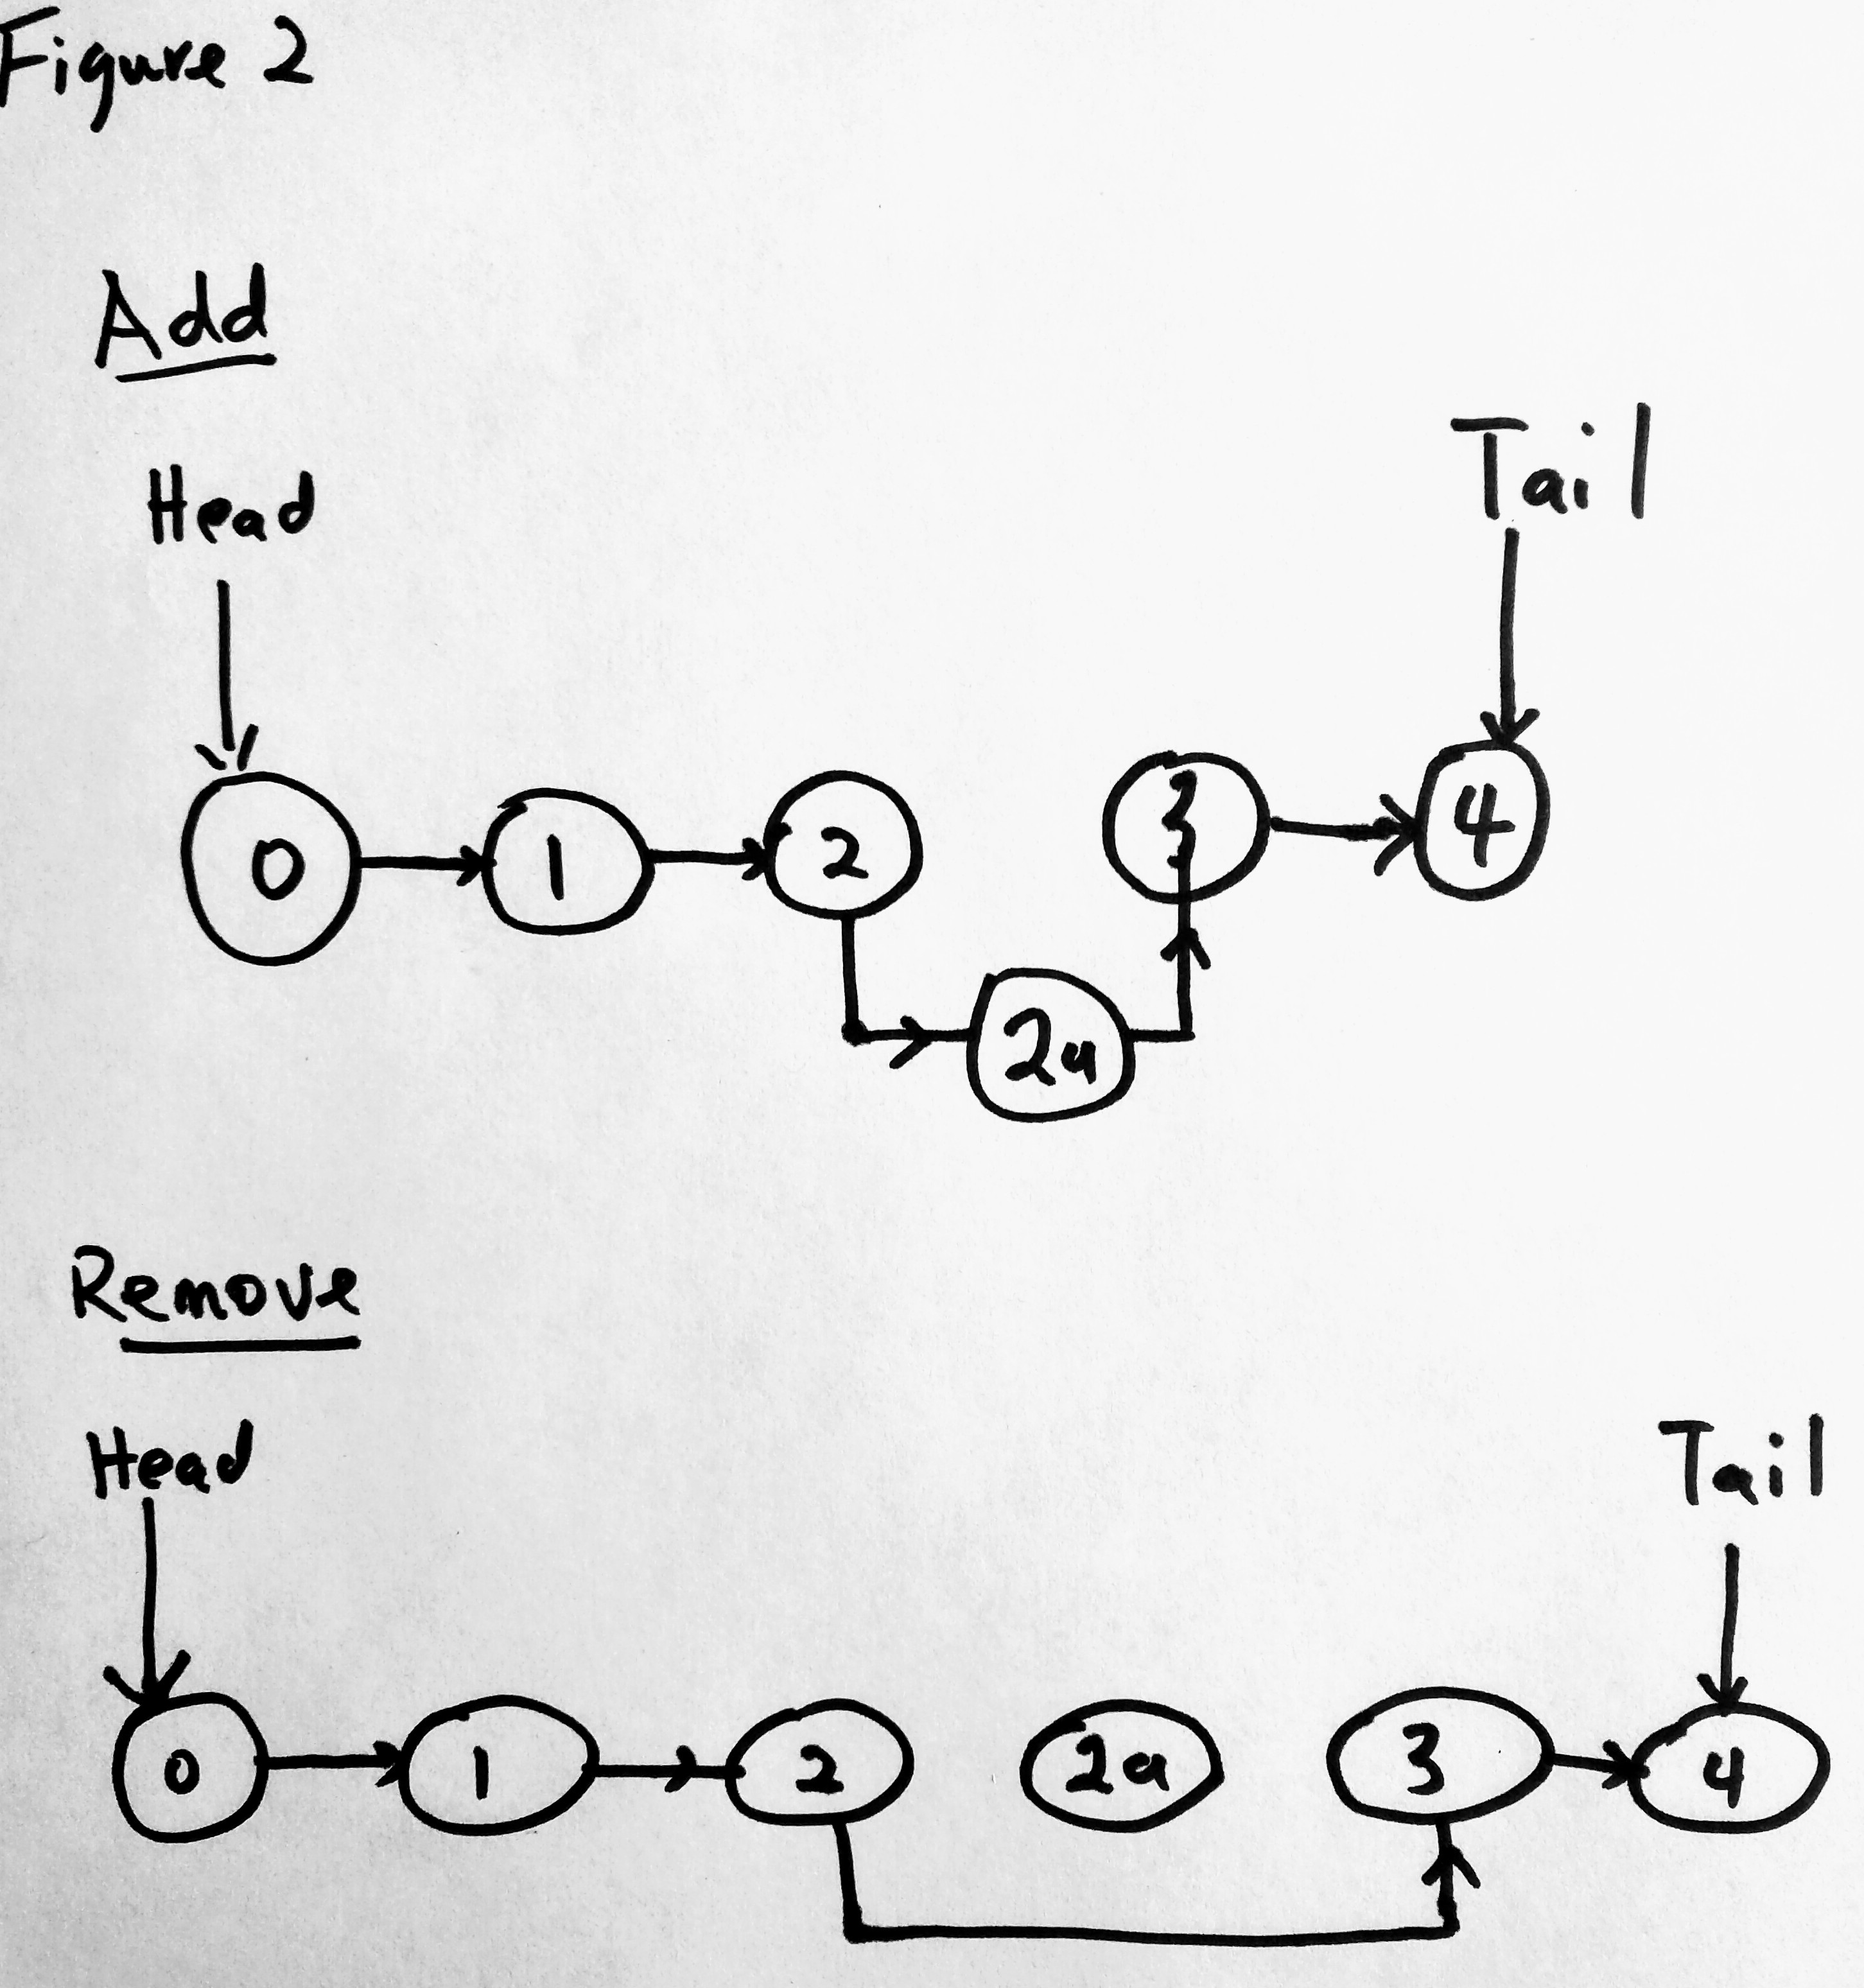 Linked List Add and Remove